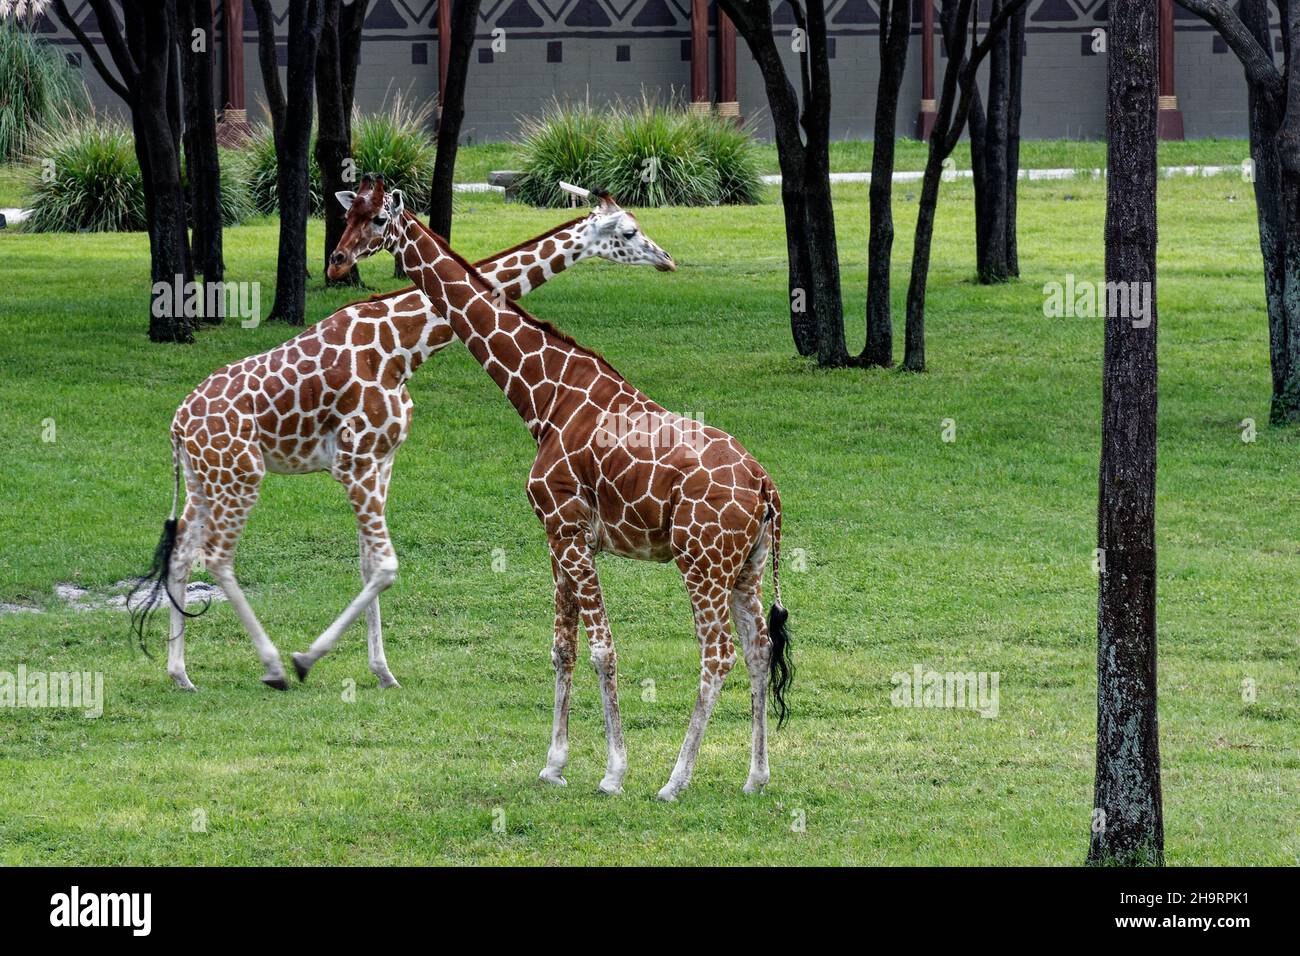 Couple of giraffes walking in the zoo, near the trees Stock Photo